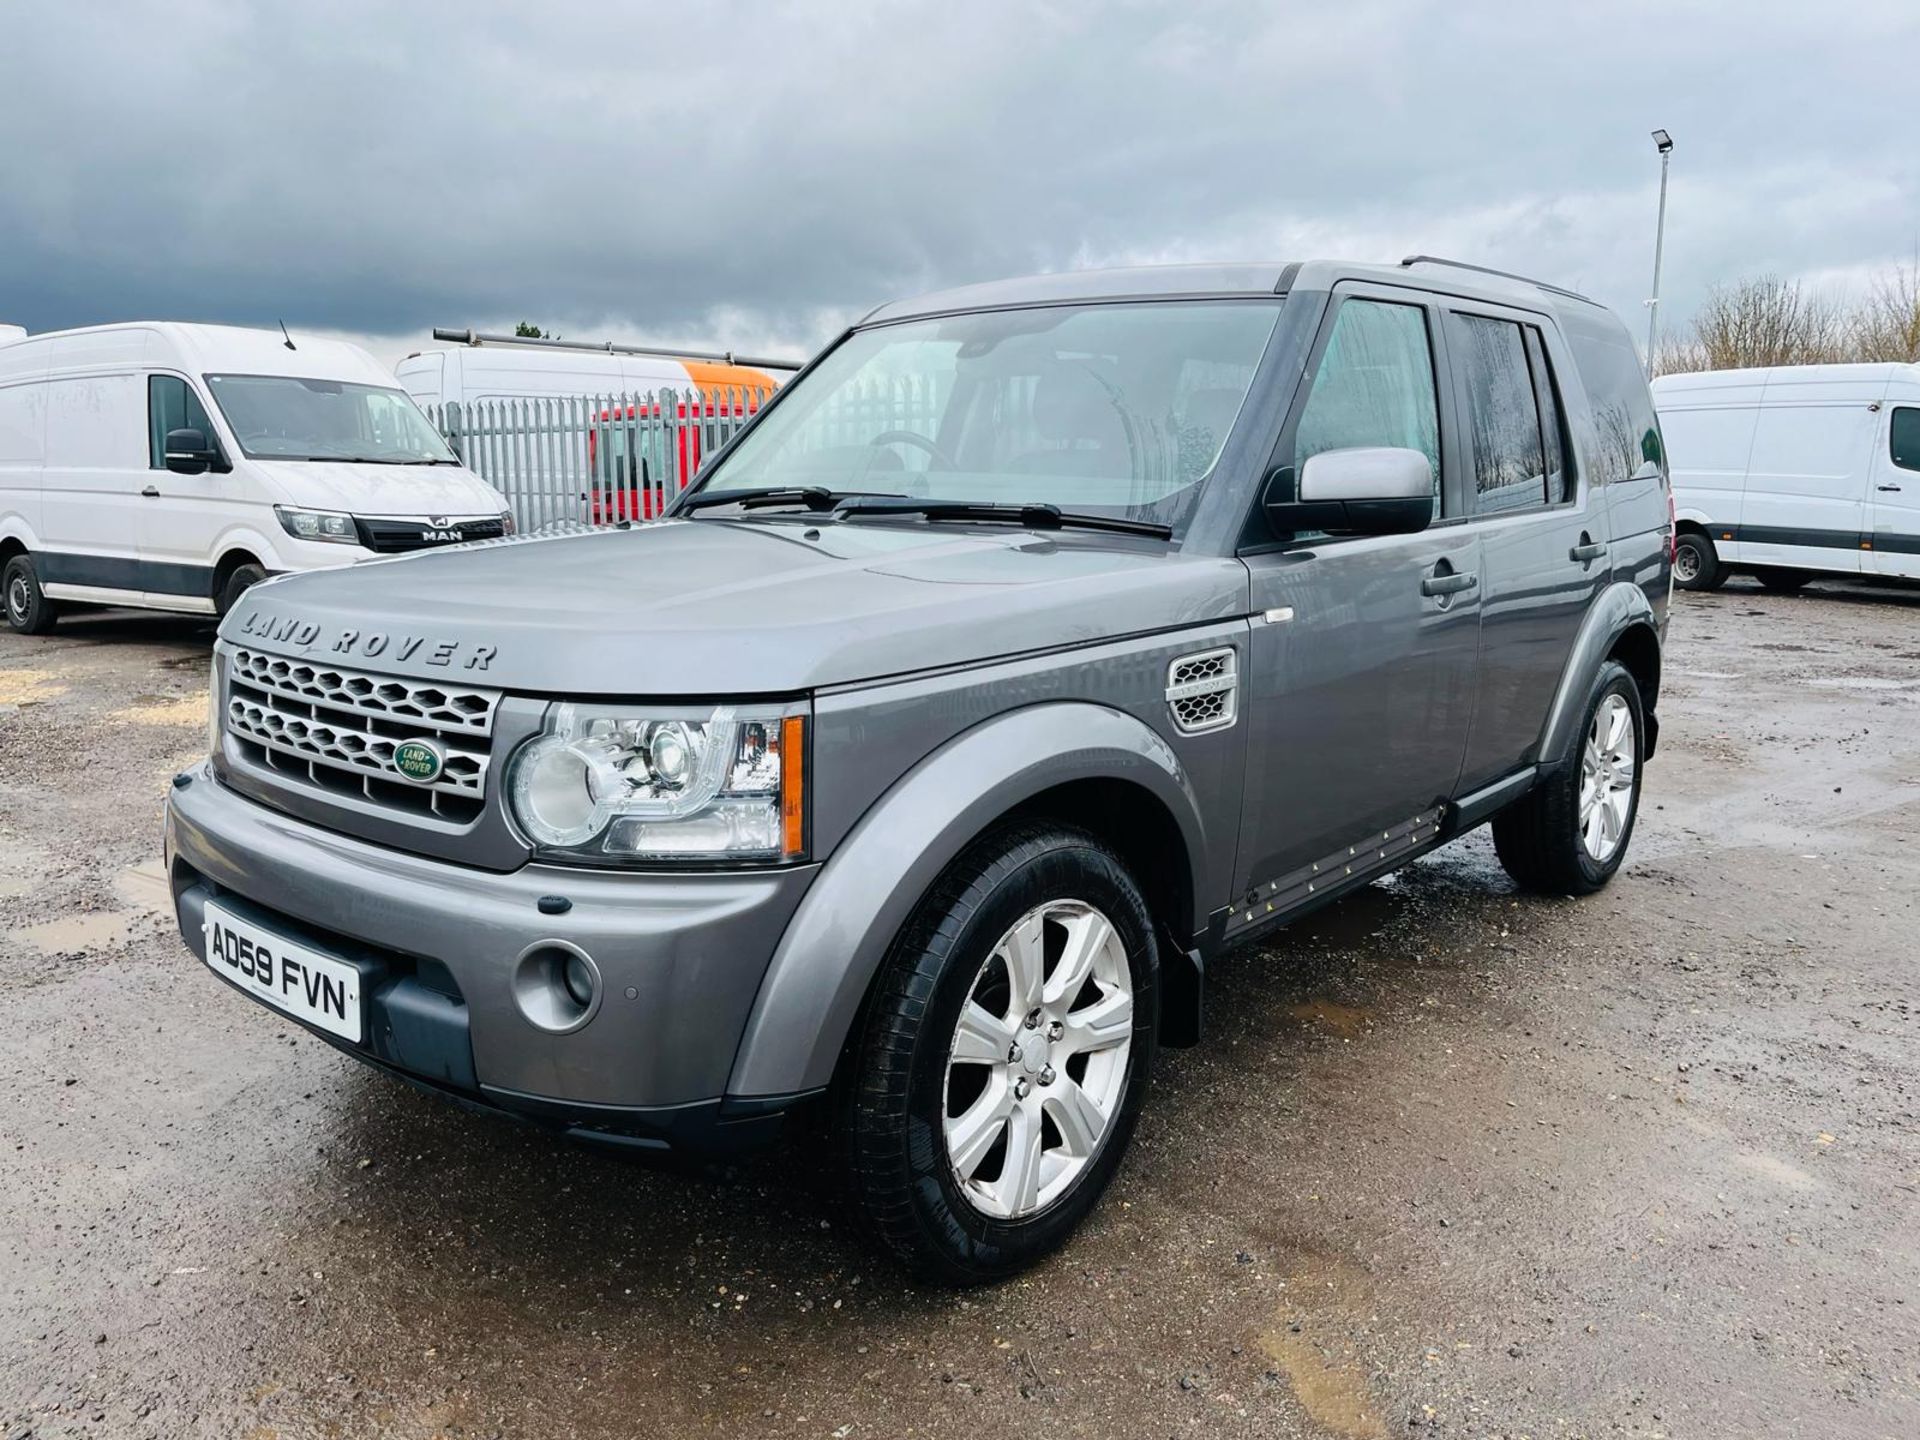 Land Rover Discovery 4 3.0 TDV6 HSE 4WD 2009 '59 Reg' Full Spec - No Vat - 7 Seats - Image 3 of 39